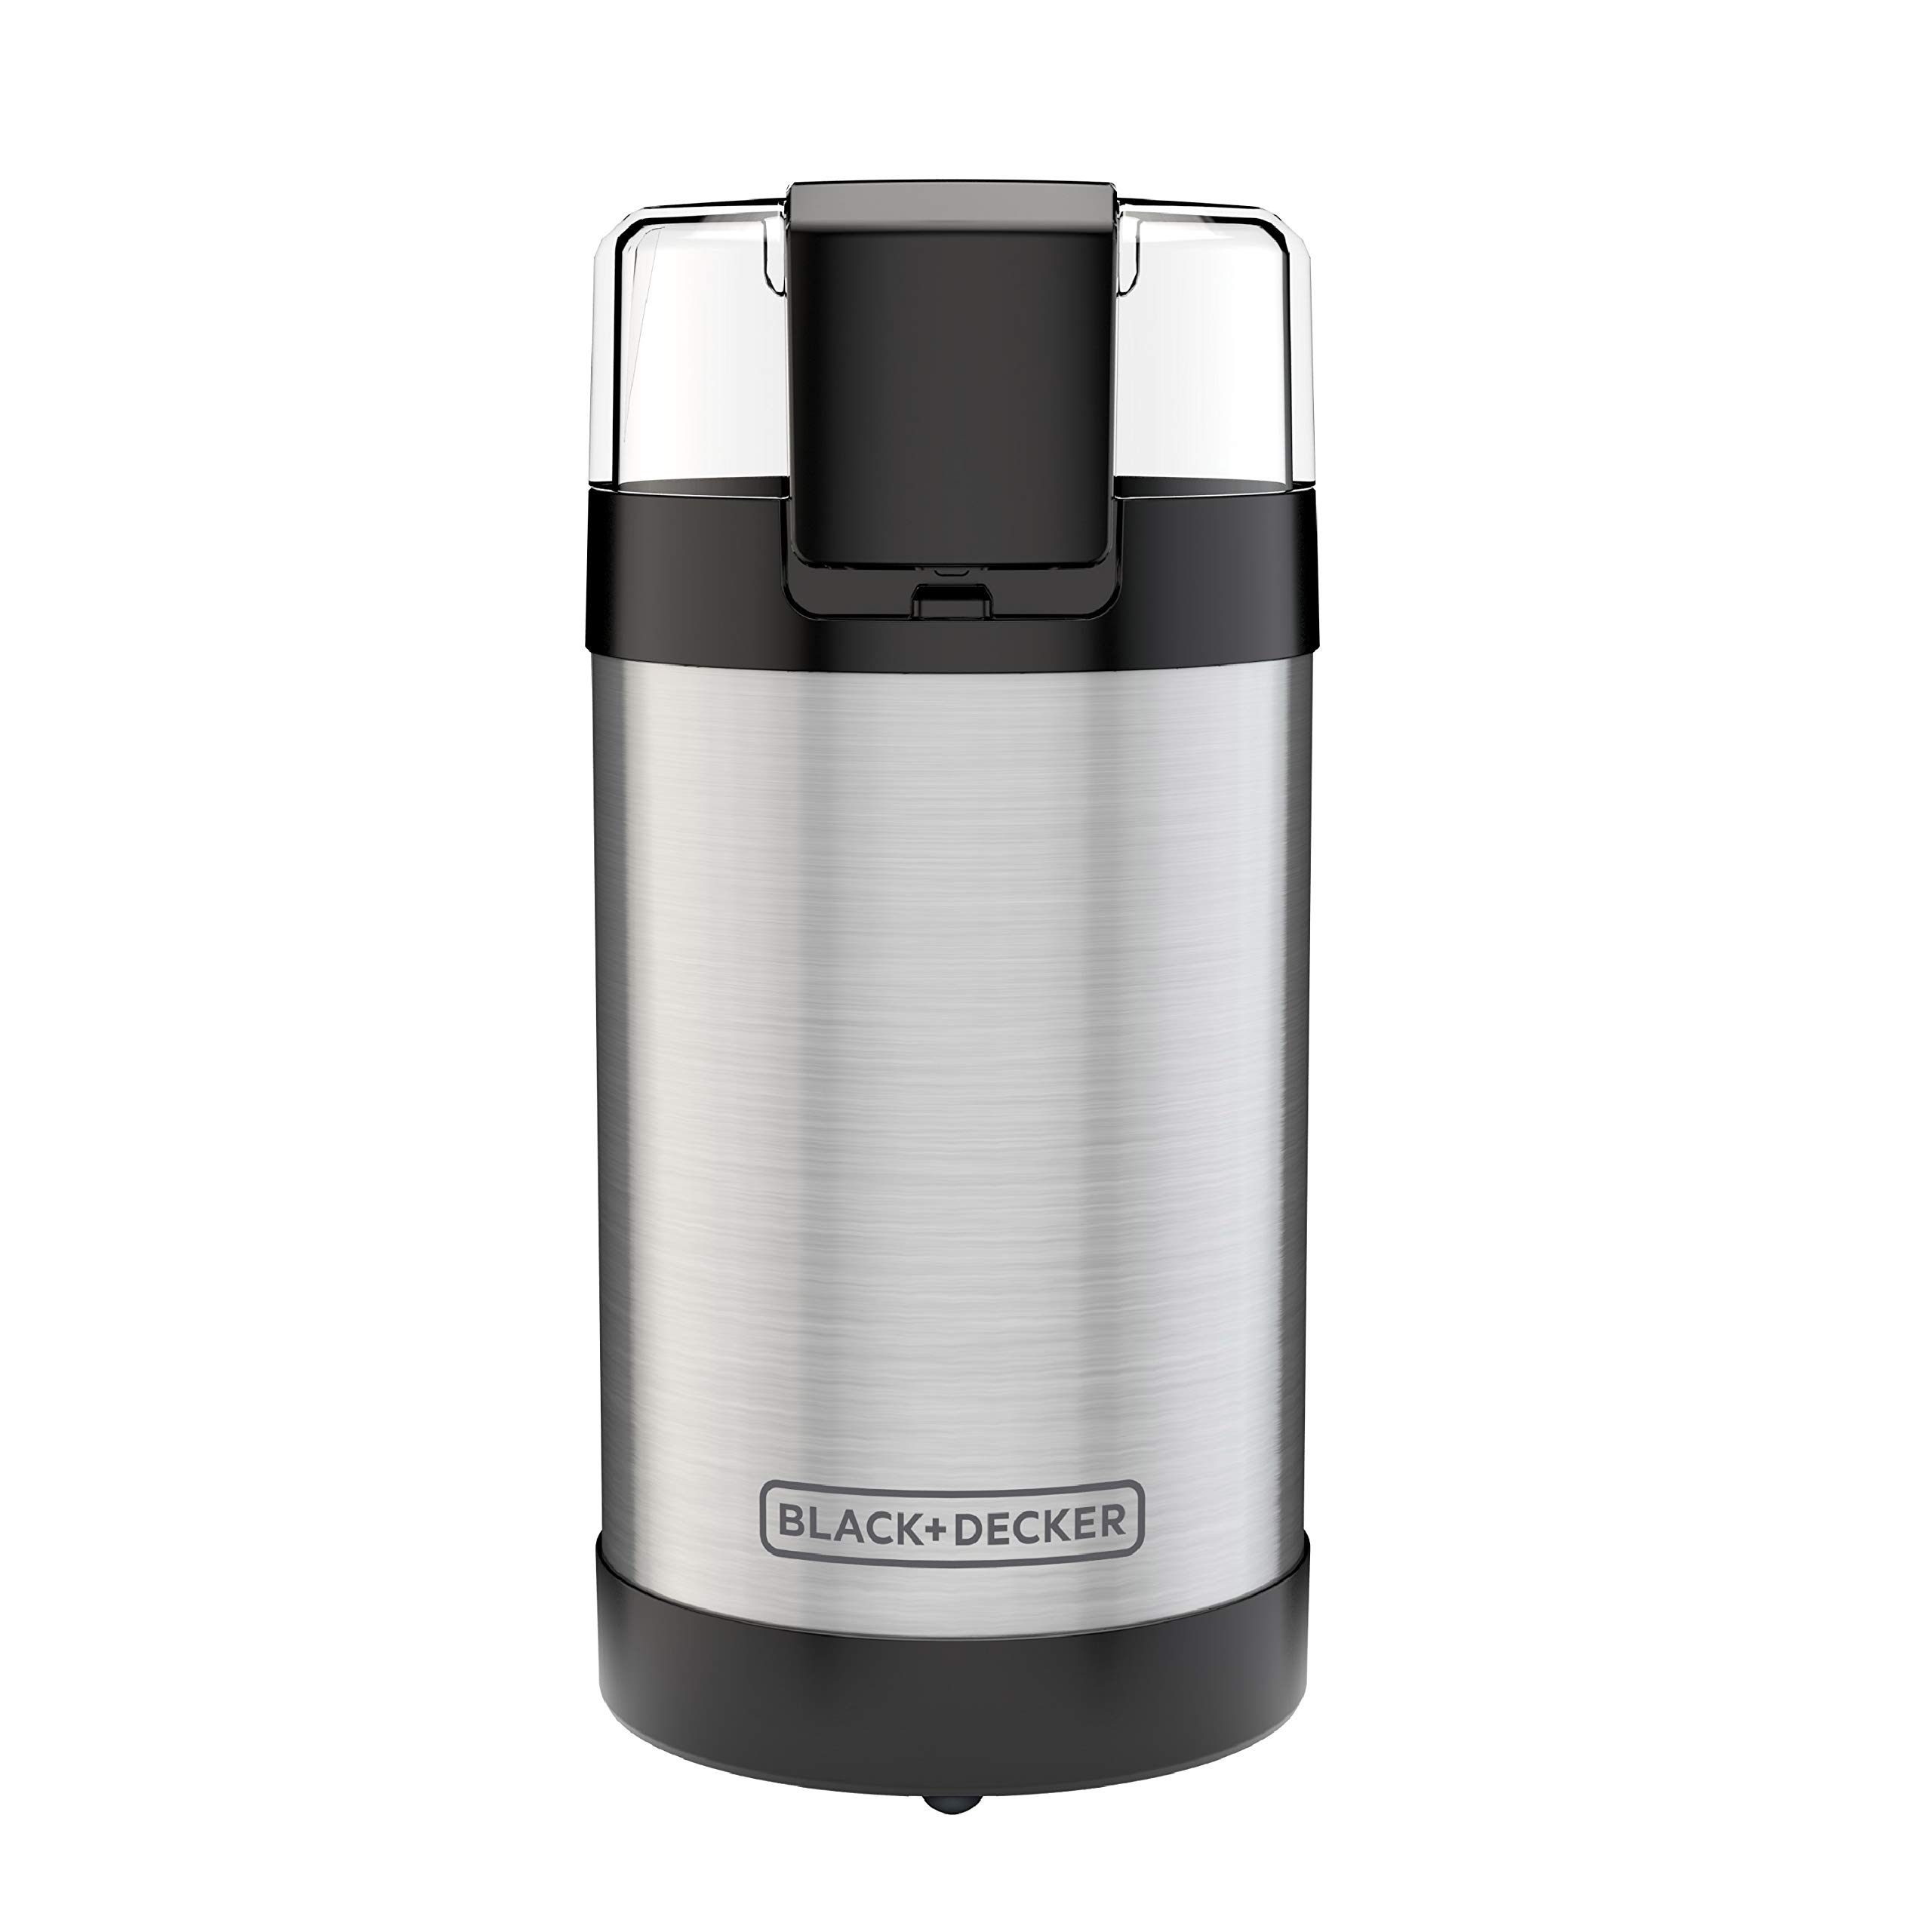 Black + Decker One Touch Coffee Grinder $15.29 + Free Shipping w/ Prime or on $35+